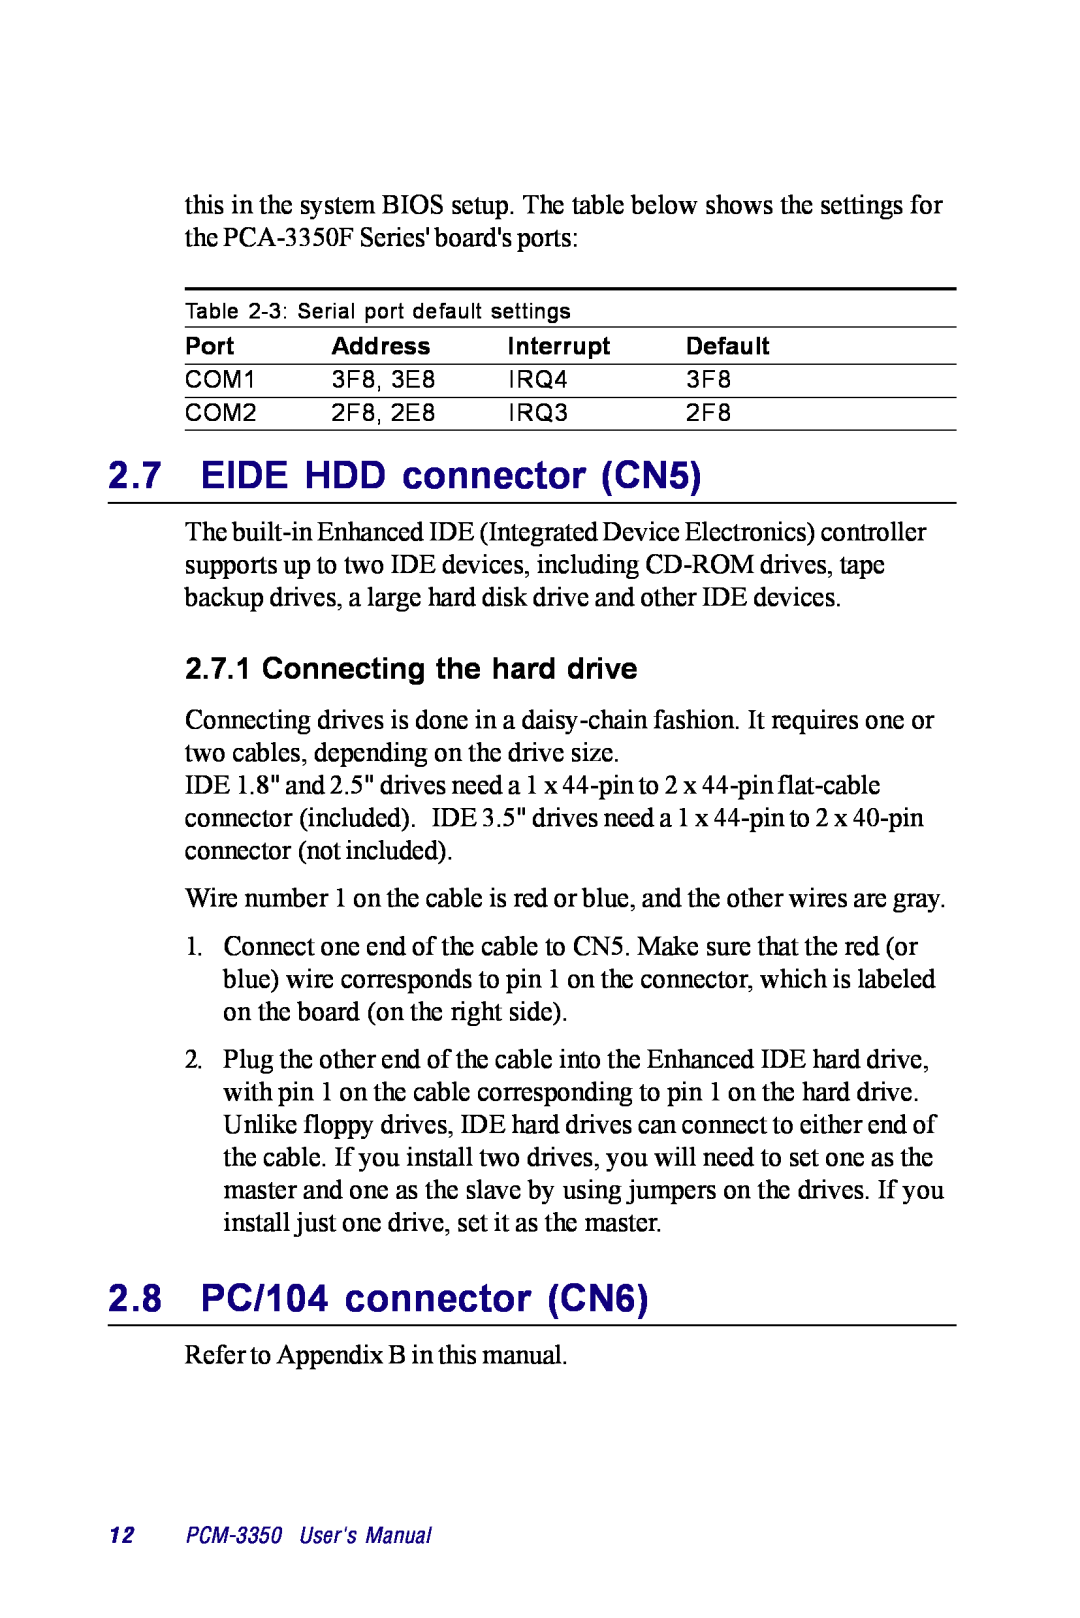 Advantech PCM-3350 Series user manual EIDE HDD connector CN5, 2.8 PC/104 connector CN6, Connecting the hard drive 